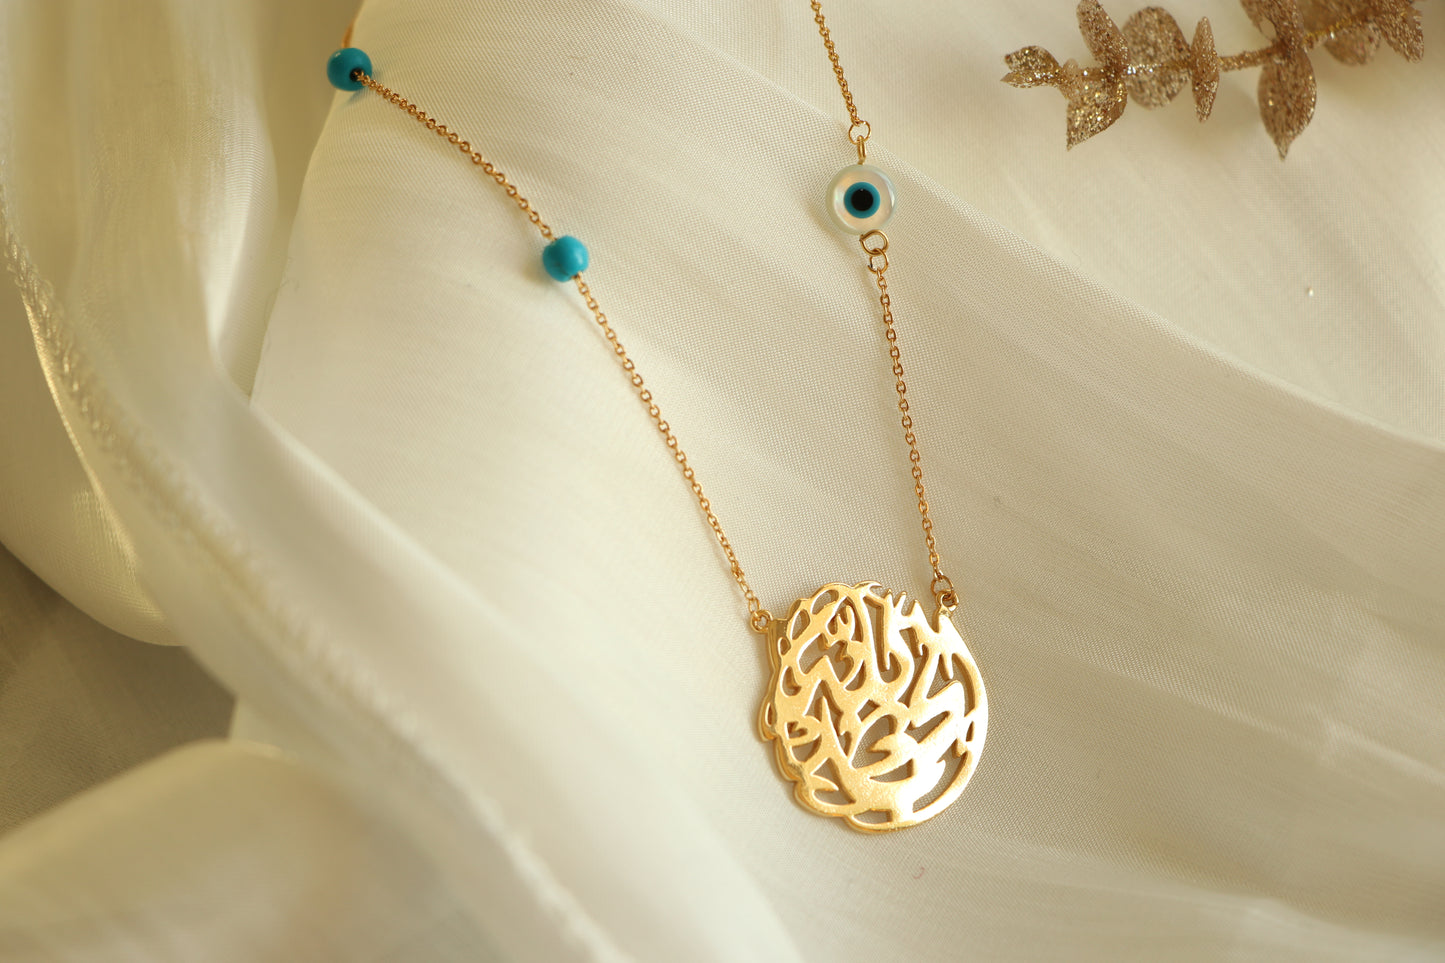 Necklace (ALHAMDULILLAH) THANK GOD Word In Arabic Calligraphy with blue beads